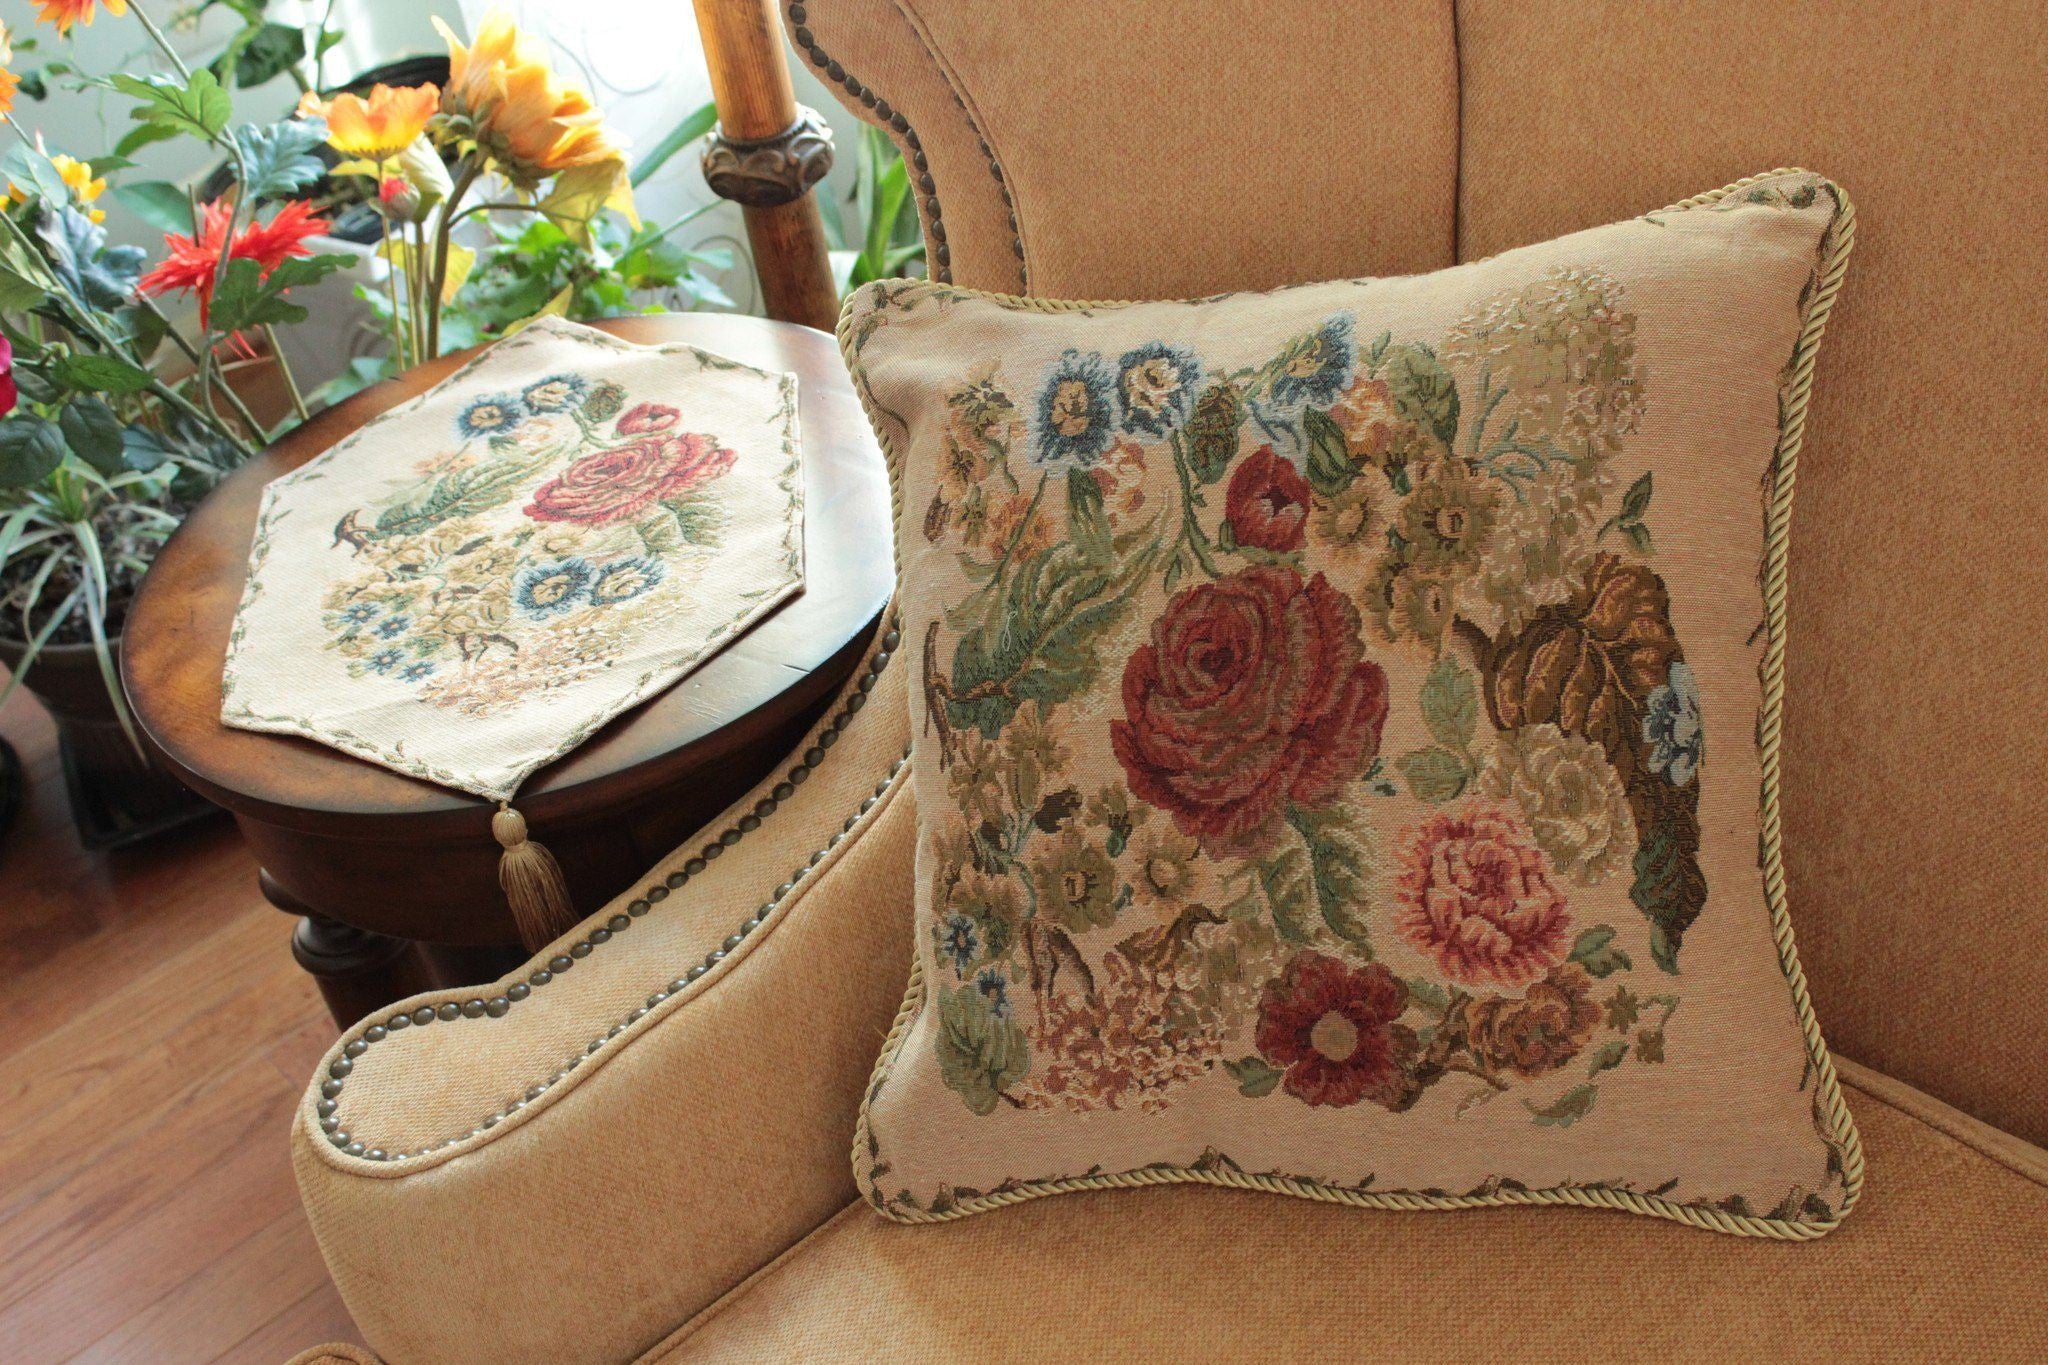 https://cdn.shopify.com/s/files/1/0206/7352/products/cushion-cover-tache-18-x-18-inch-colorful-floral-country-rustic-morning-meadow-cushion-cover-2.jpg?v=1531943313&width=2048